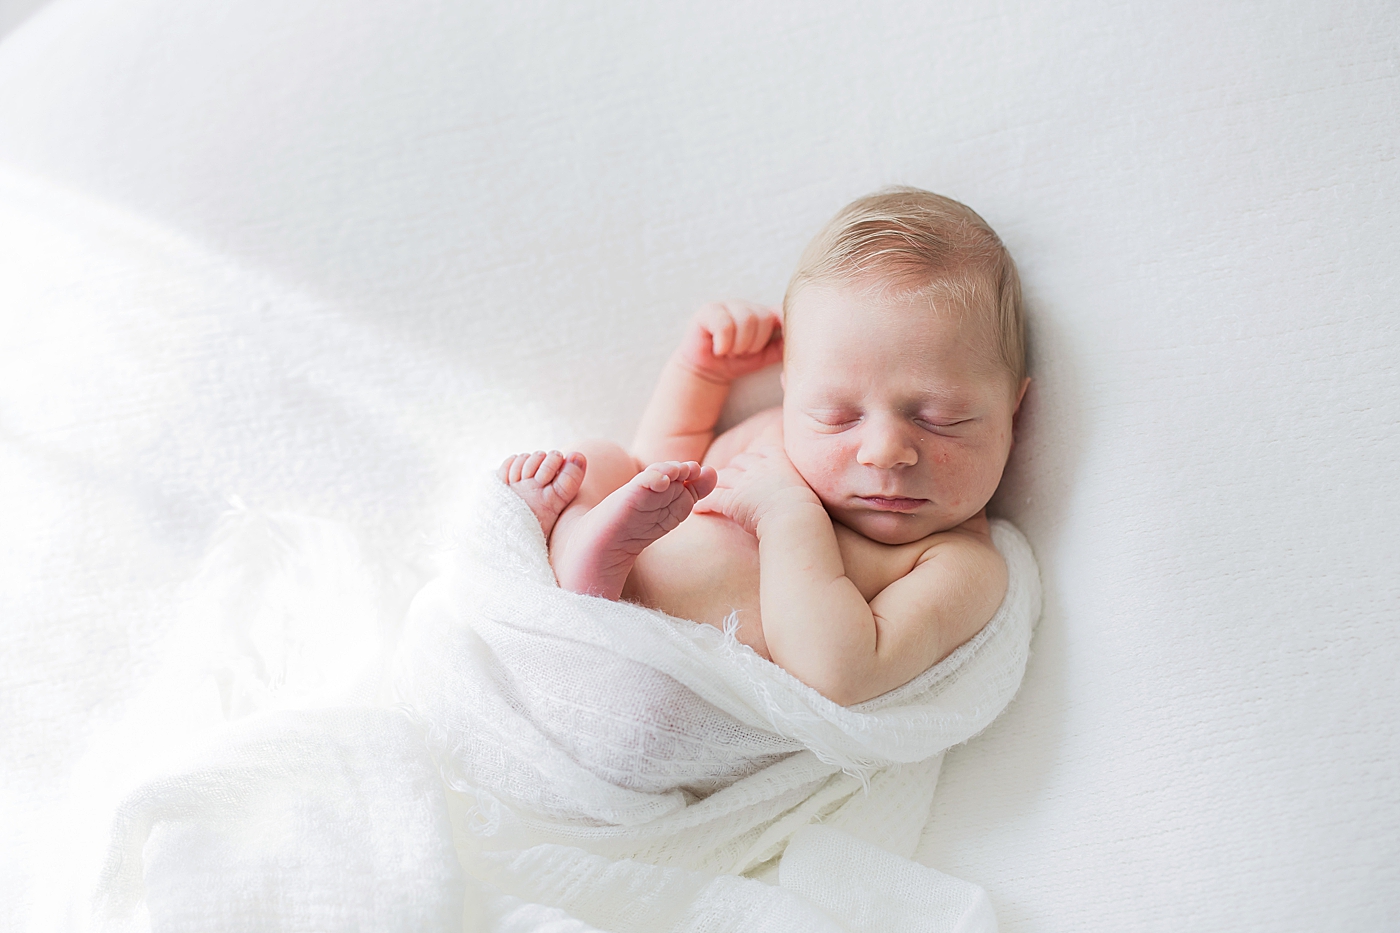 Newborn curled on back and sleeping. Photos by Fresh Light Photography.